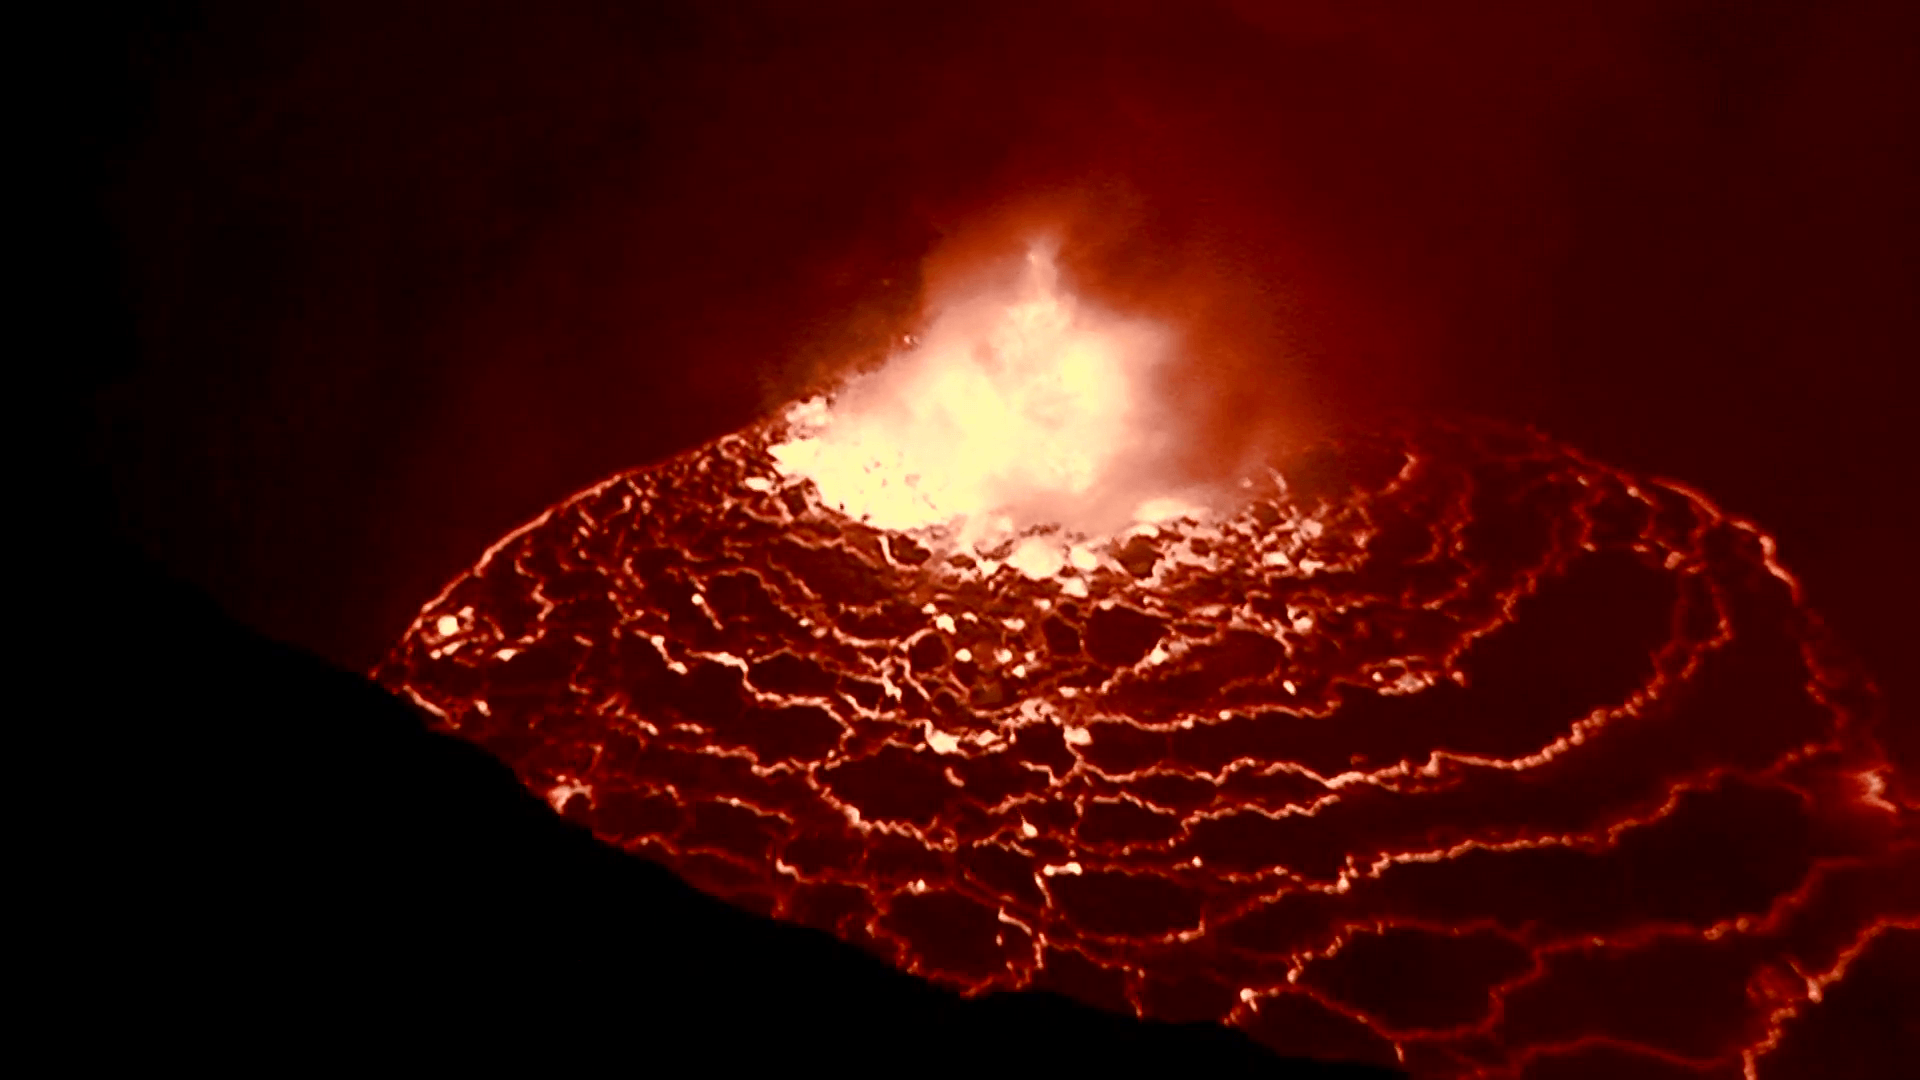 The spectacular Nyiragongo volcano erupts at night in the Democratic